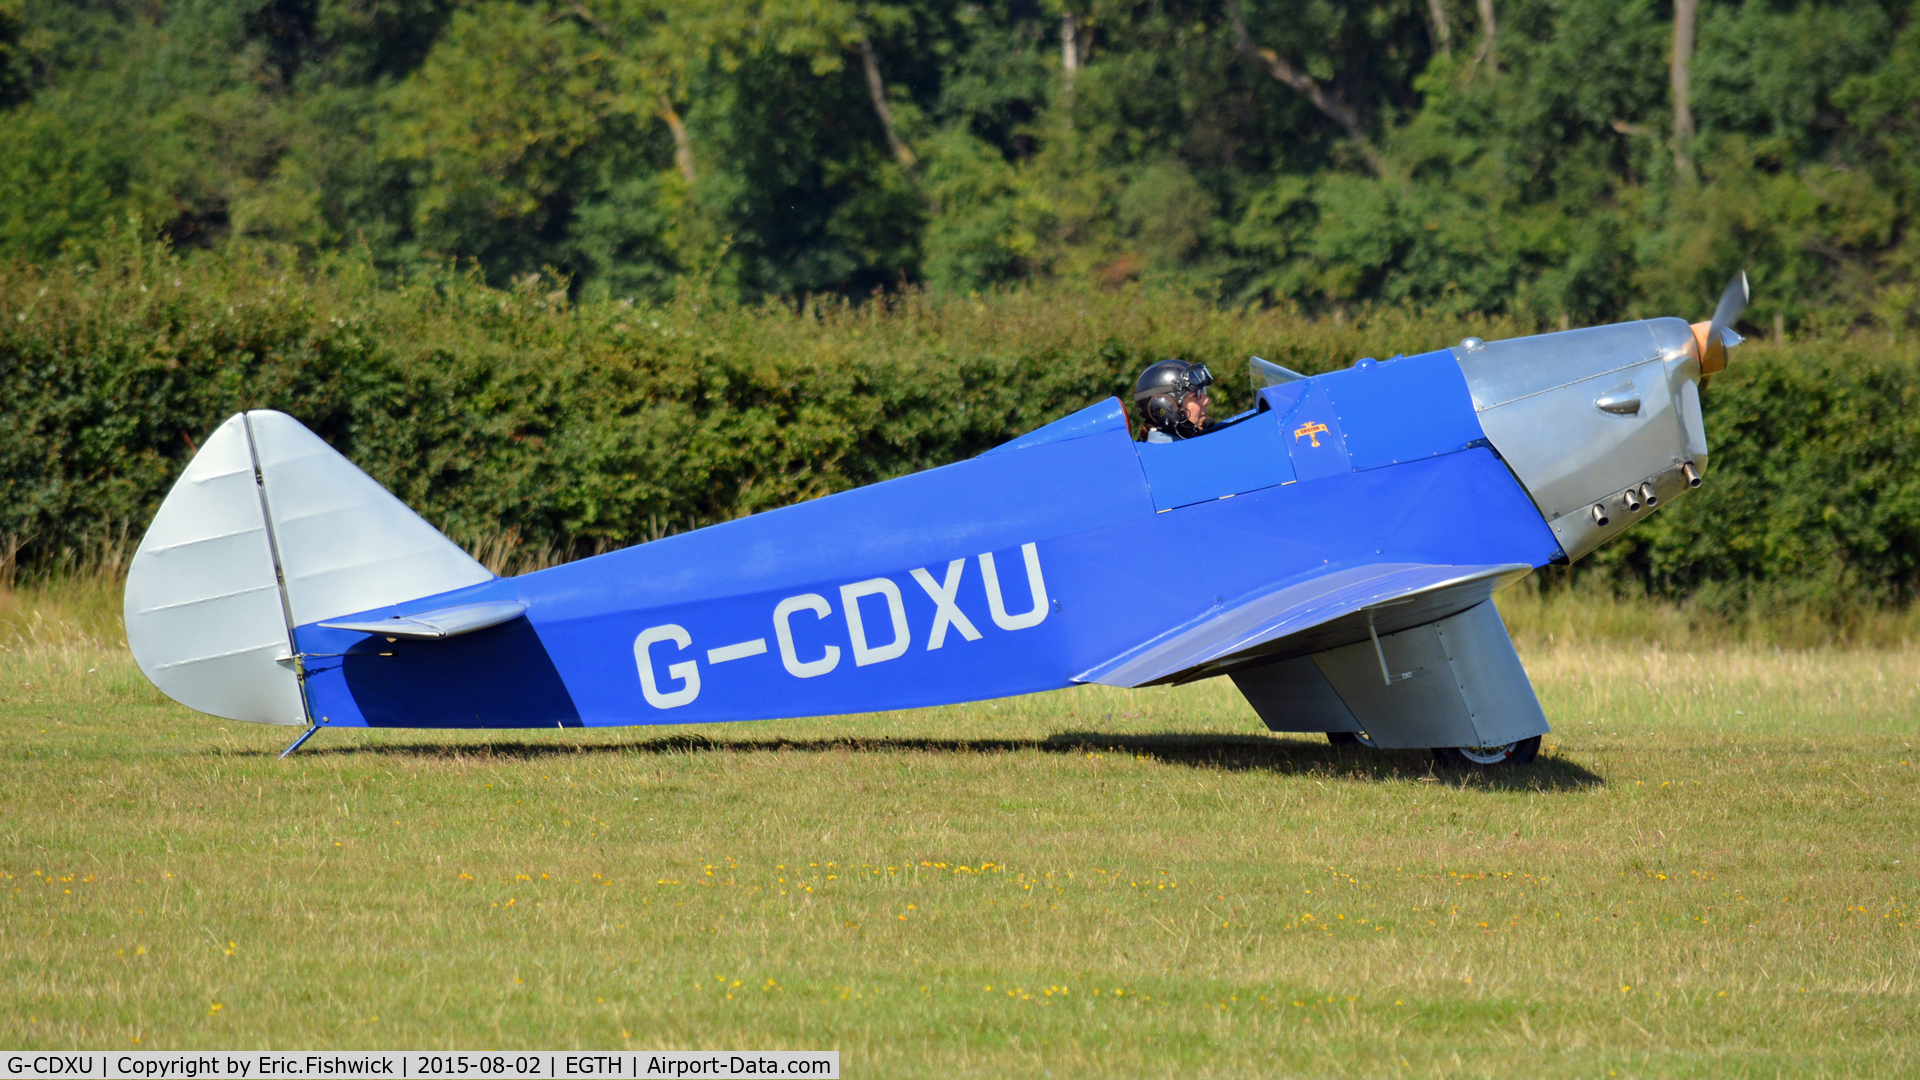 G-CDXU, 2006 Chilton DW1A C/N PFA 225-12038, 2. G-CDXU preparing to join the Air Race at The Shuttleworth Wings and Wheels Airshow, Aug. 2015.